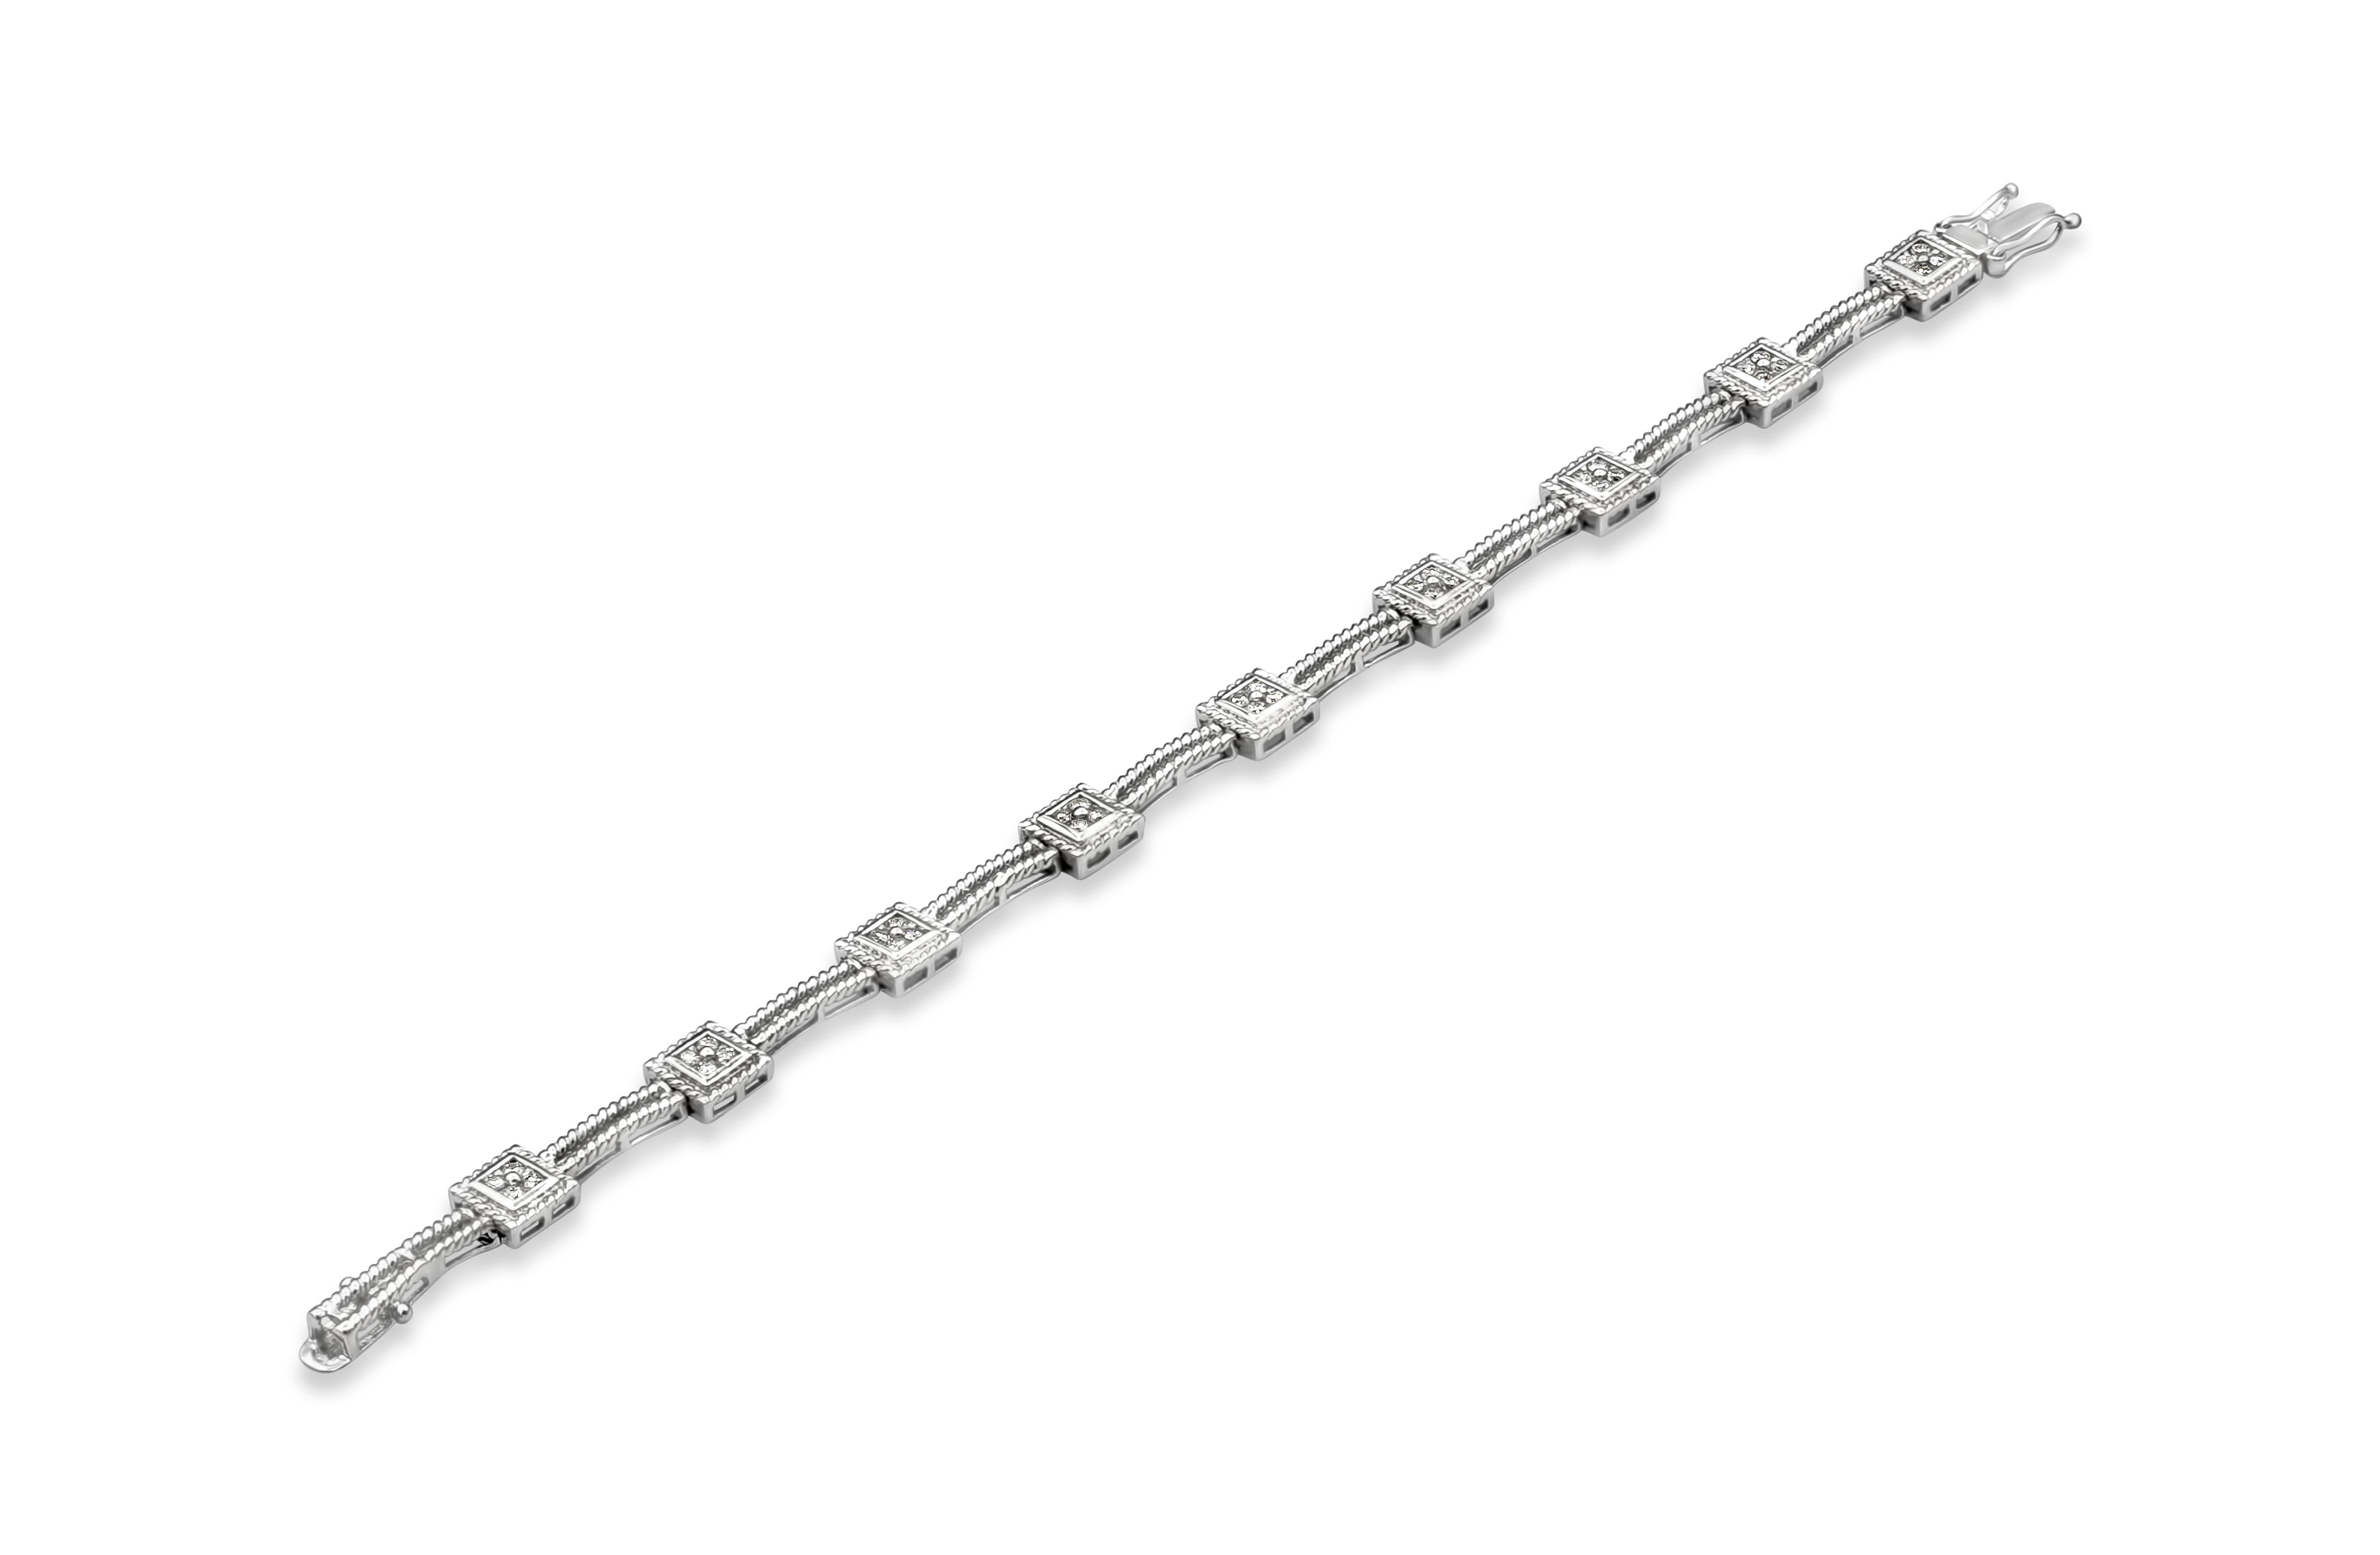 A fashionable bracelet, showcasing 36 round brilliant cut diamonds weighing 0.75 carat total with G color and I2 clarity. Set in a box and spaced evenly in a double row rope design made of 14K white gold.




